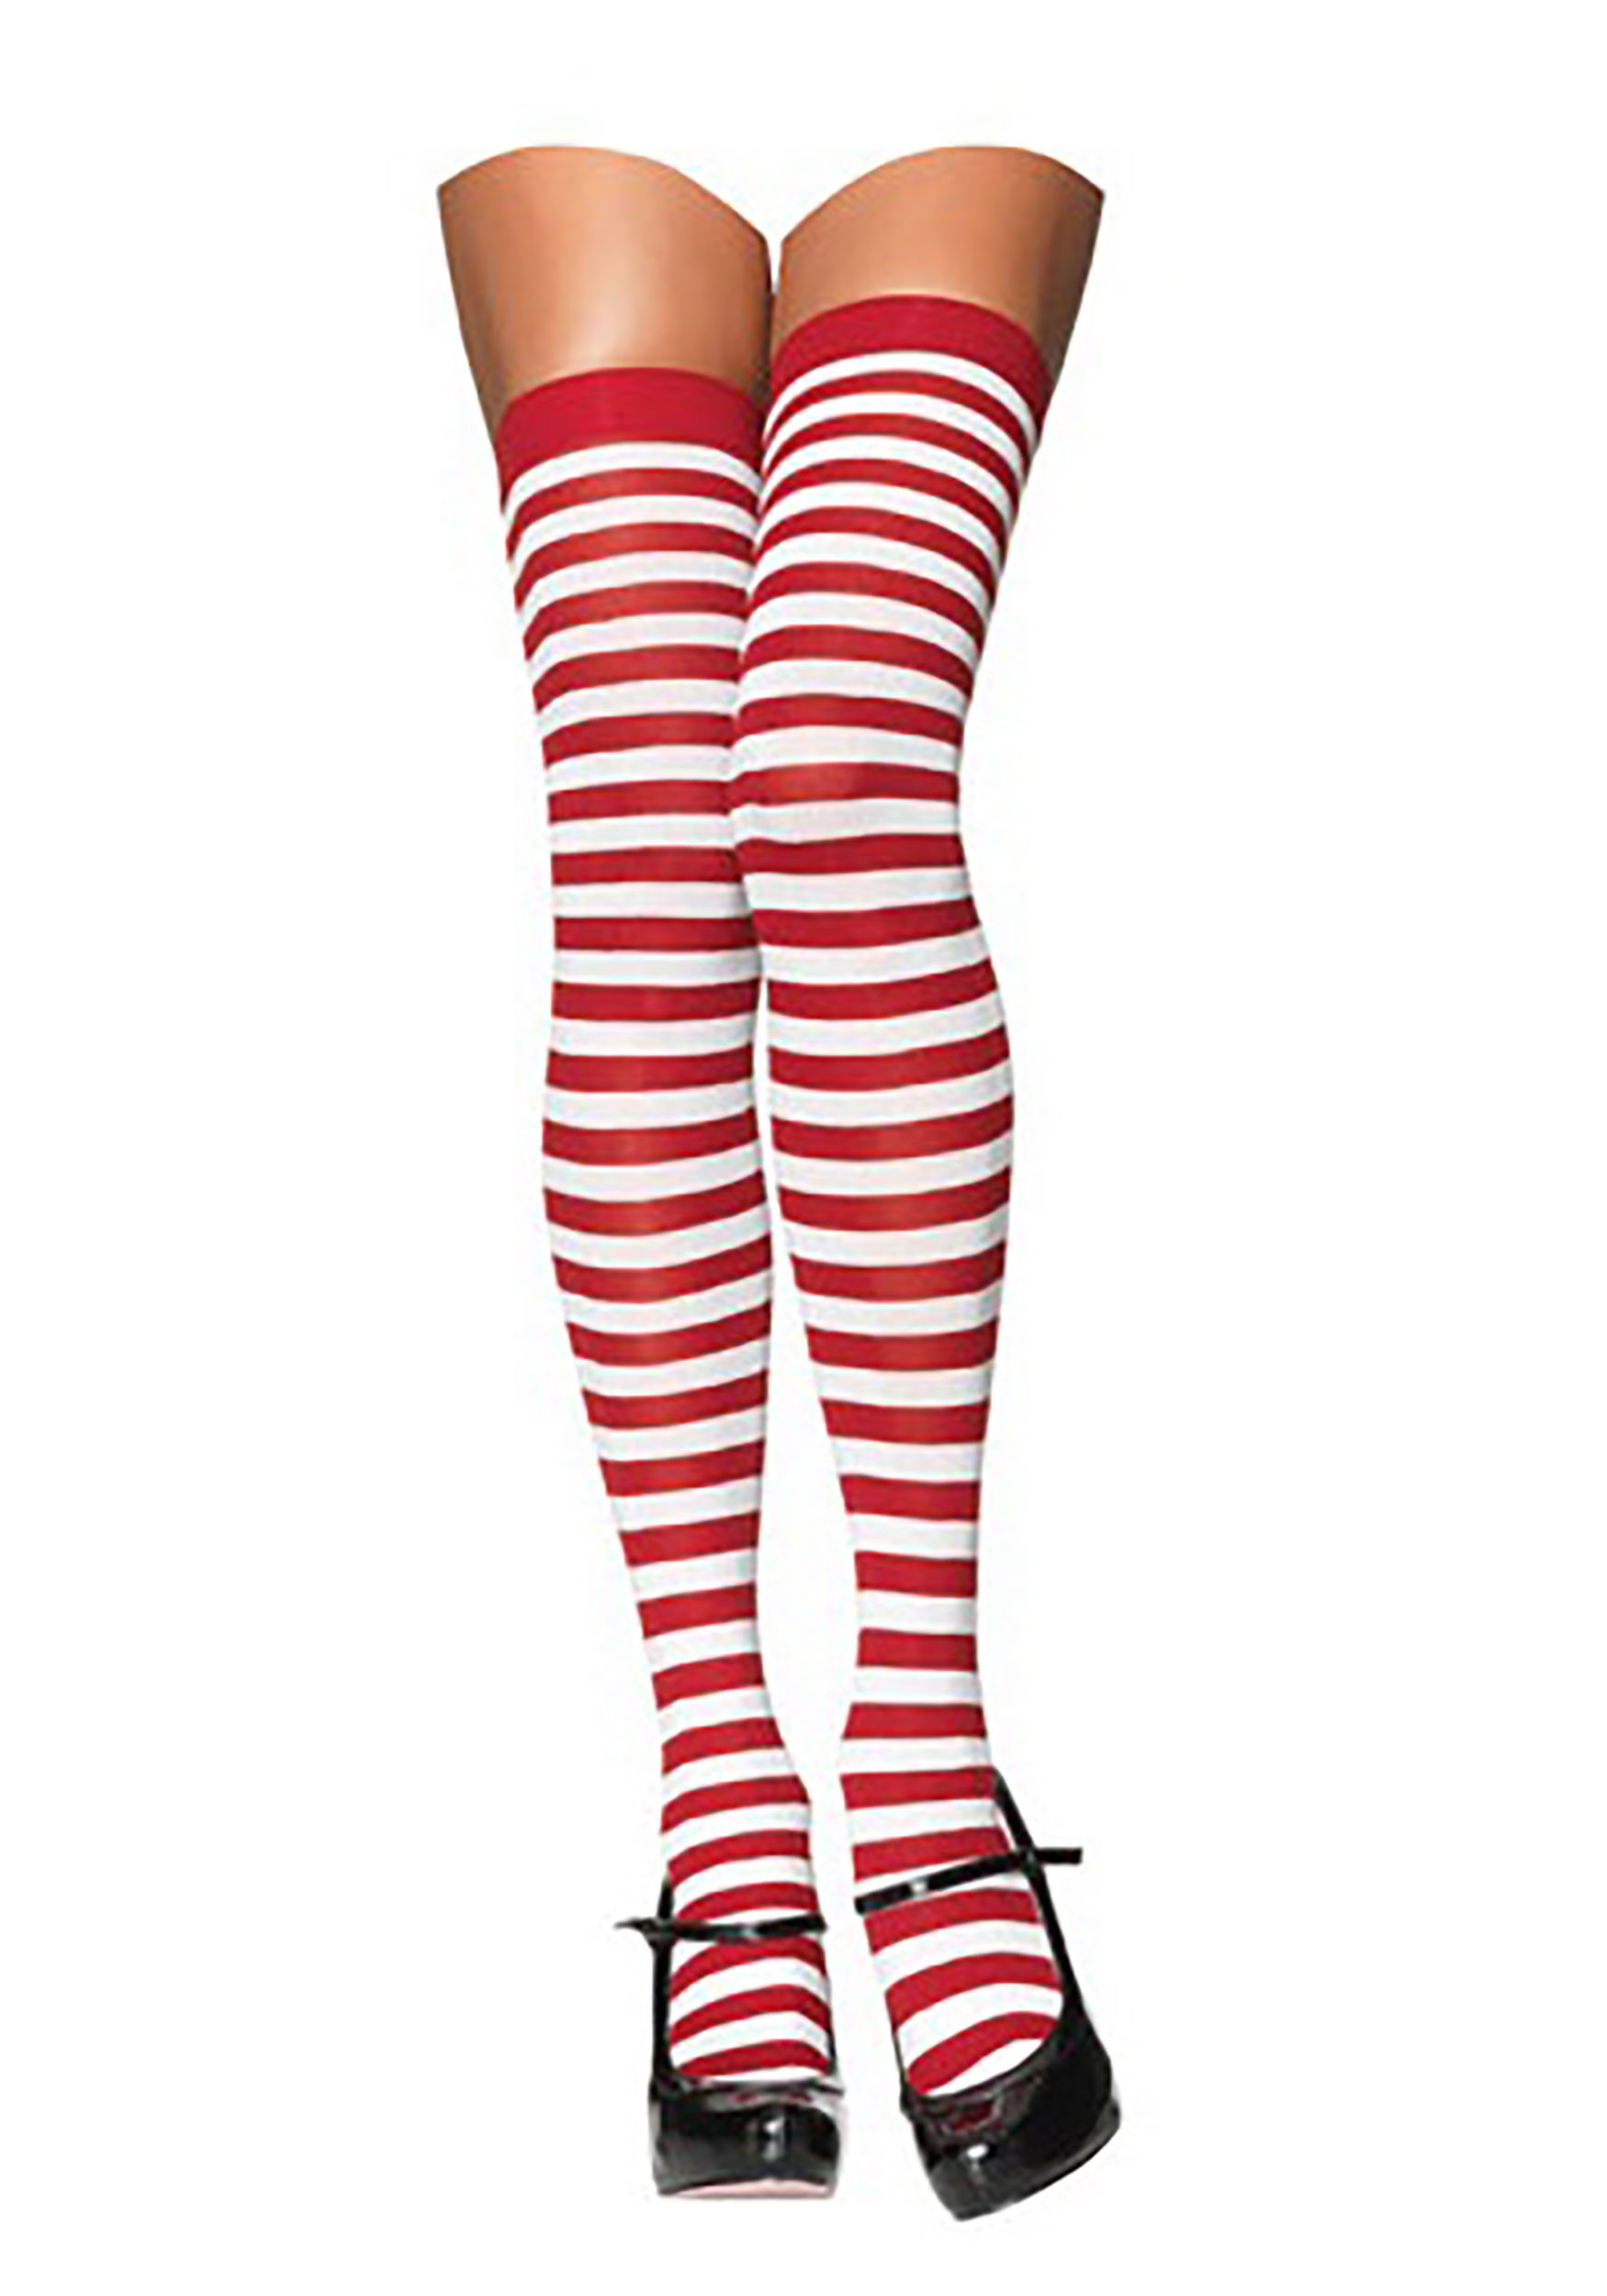 Ladies Over the Knee Striped Hold Ups Red and White Stockings Fancy Dress Party